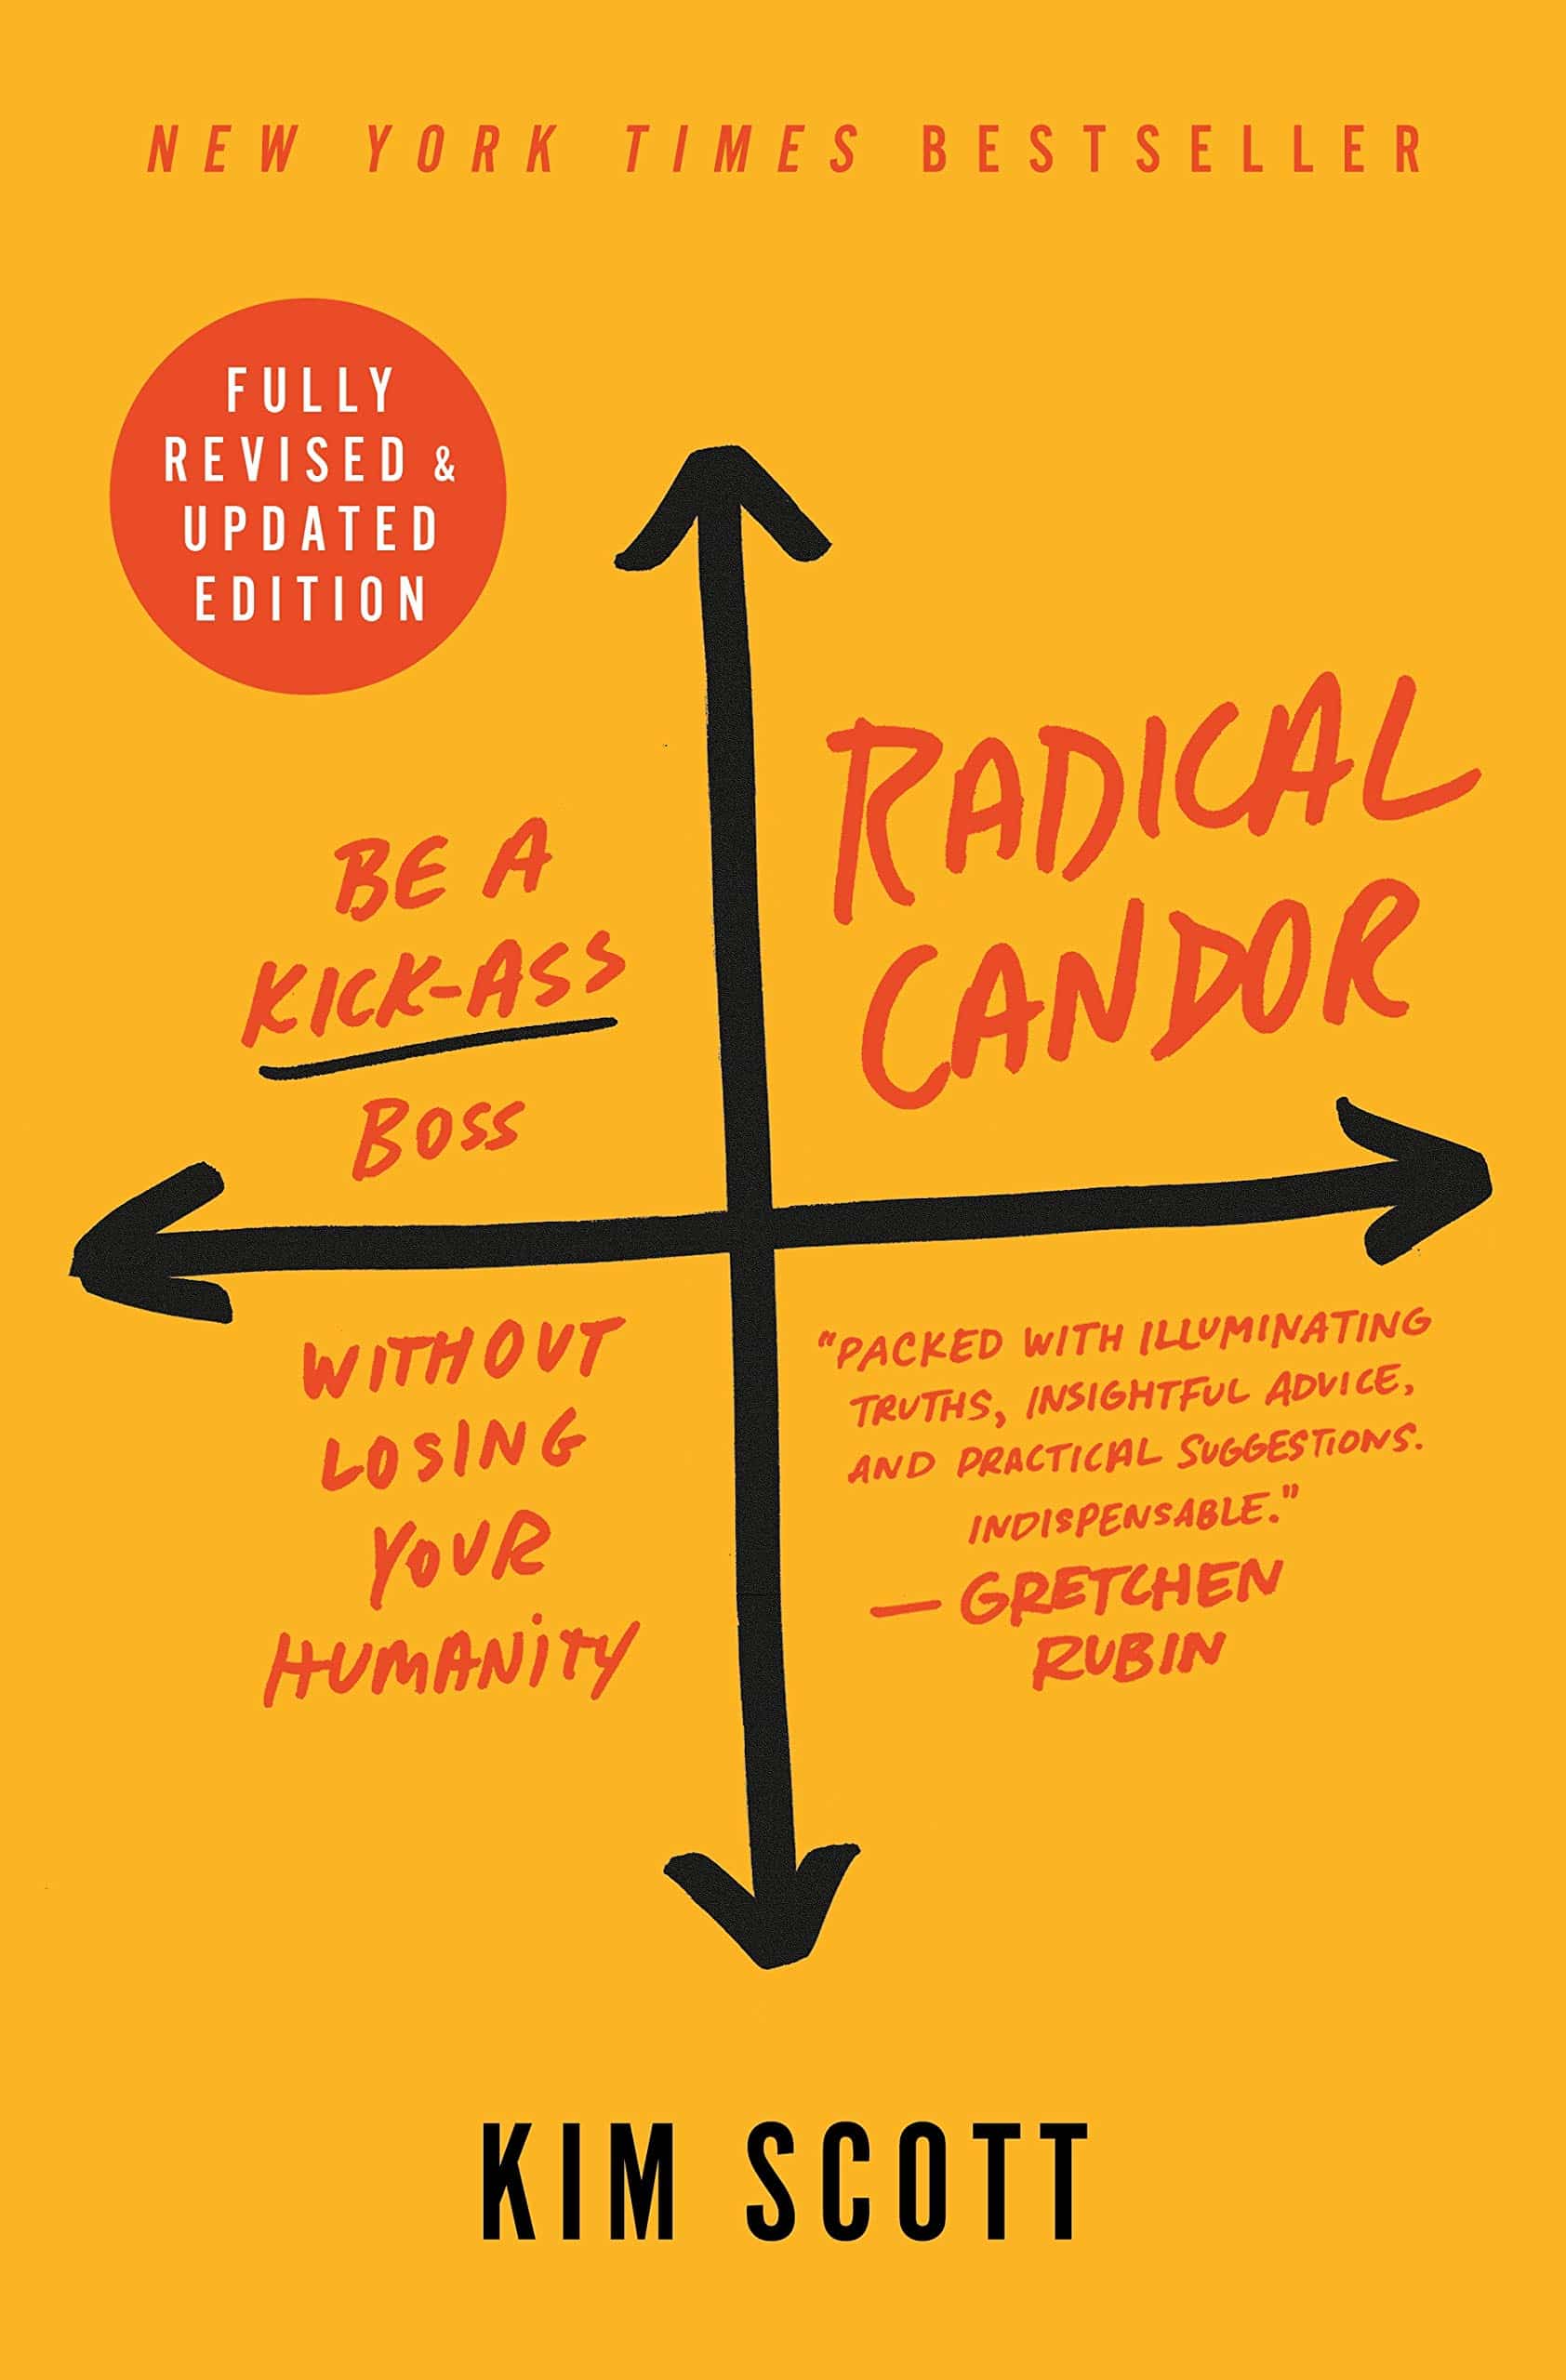 The cover of Radical Candor